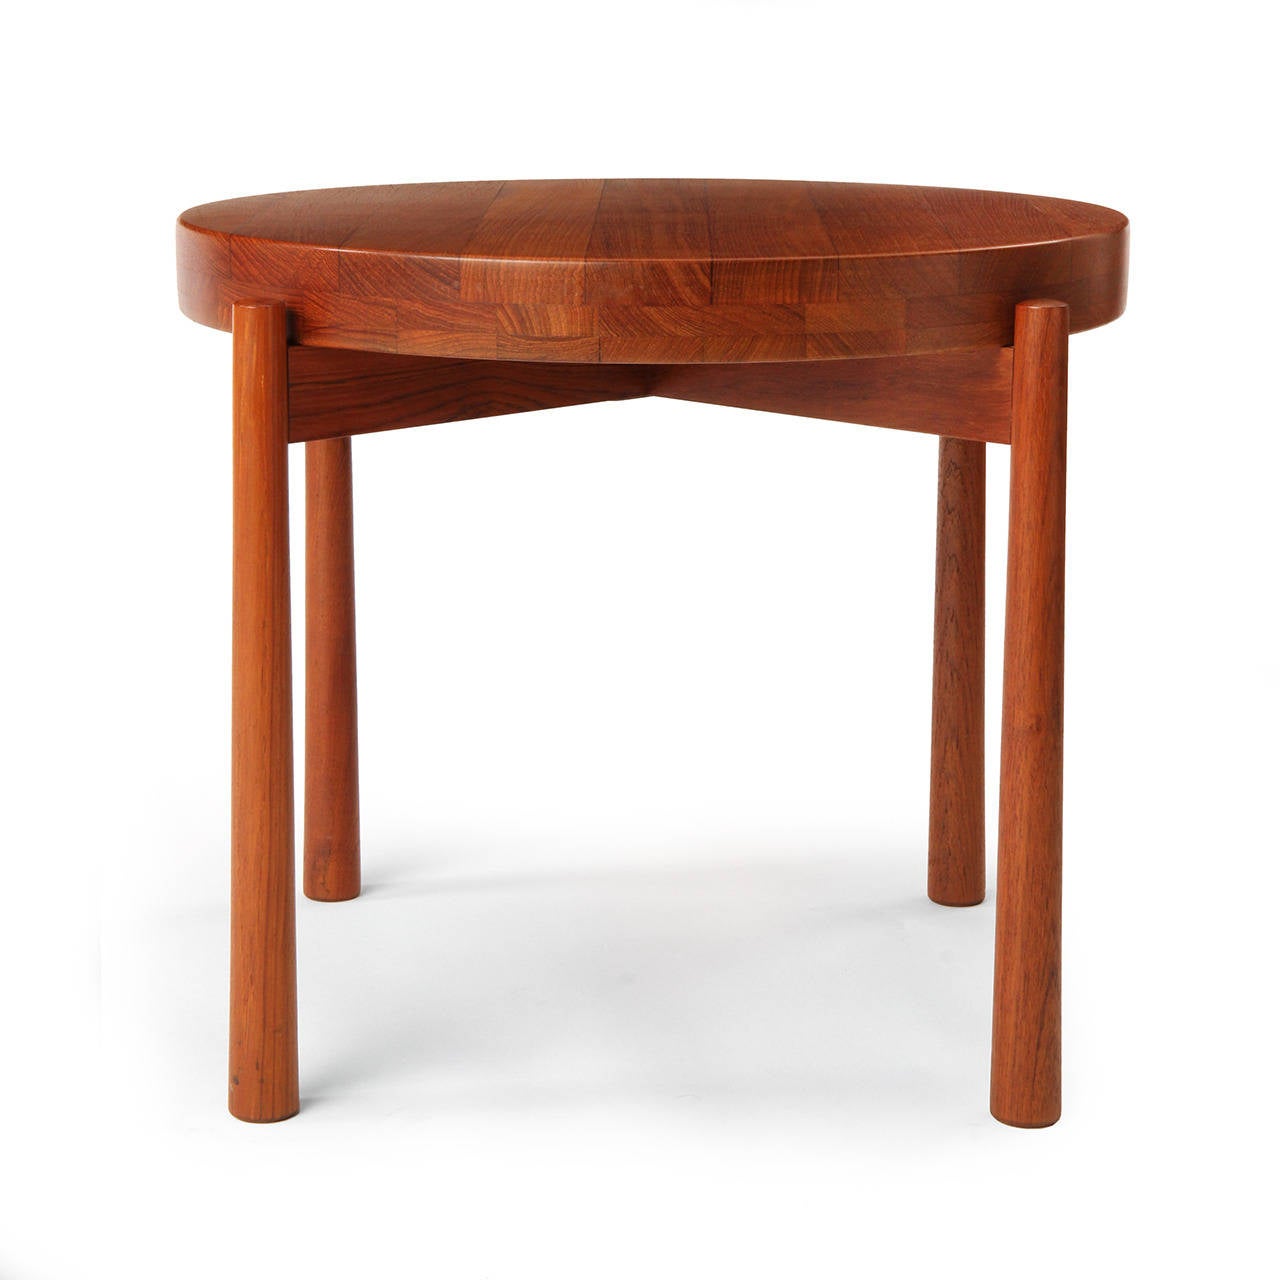 1960s Danish Modern Tray Table by Jens Quistgaard for Richard Nissen For Sale 4